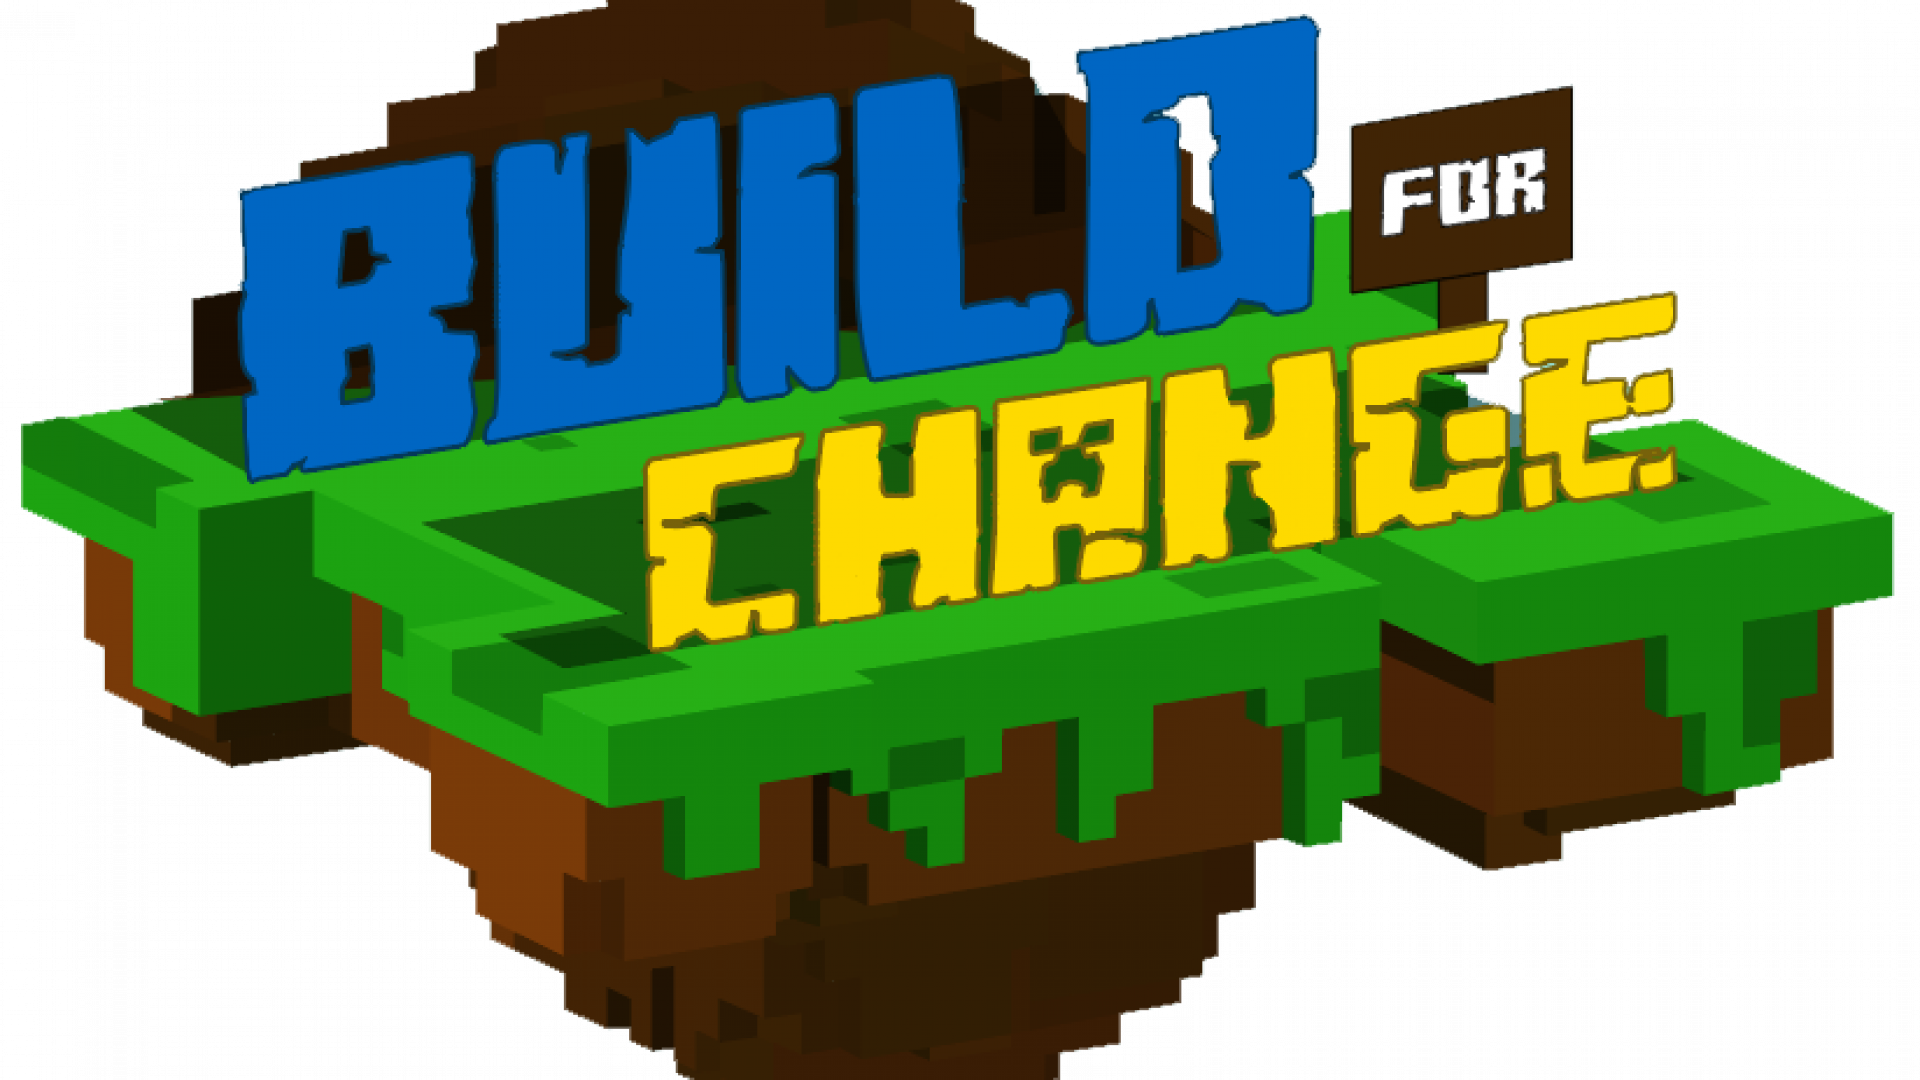 Build for Change - Island Graphic